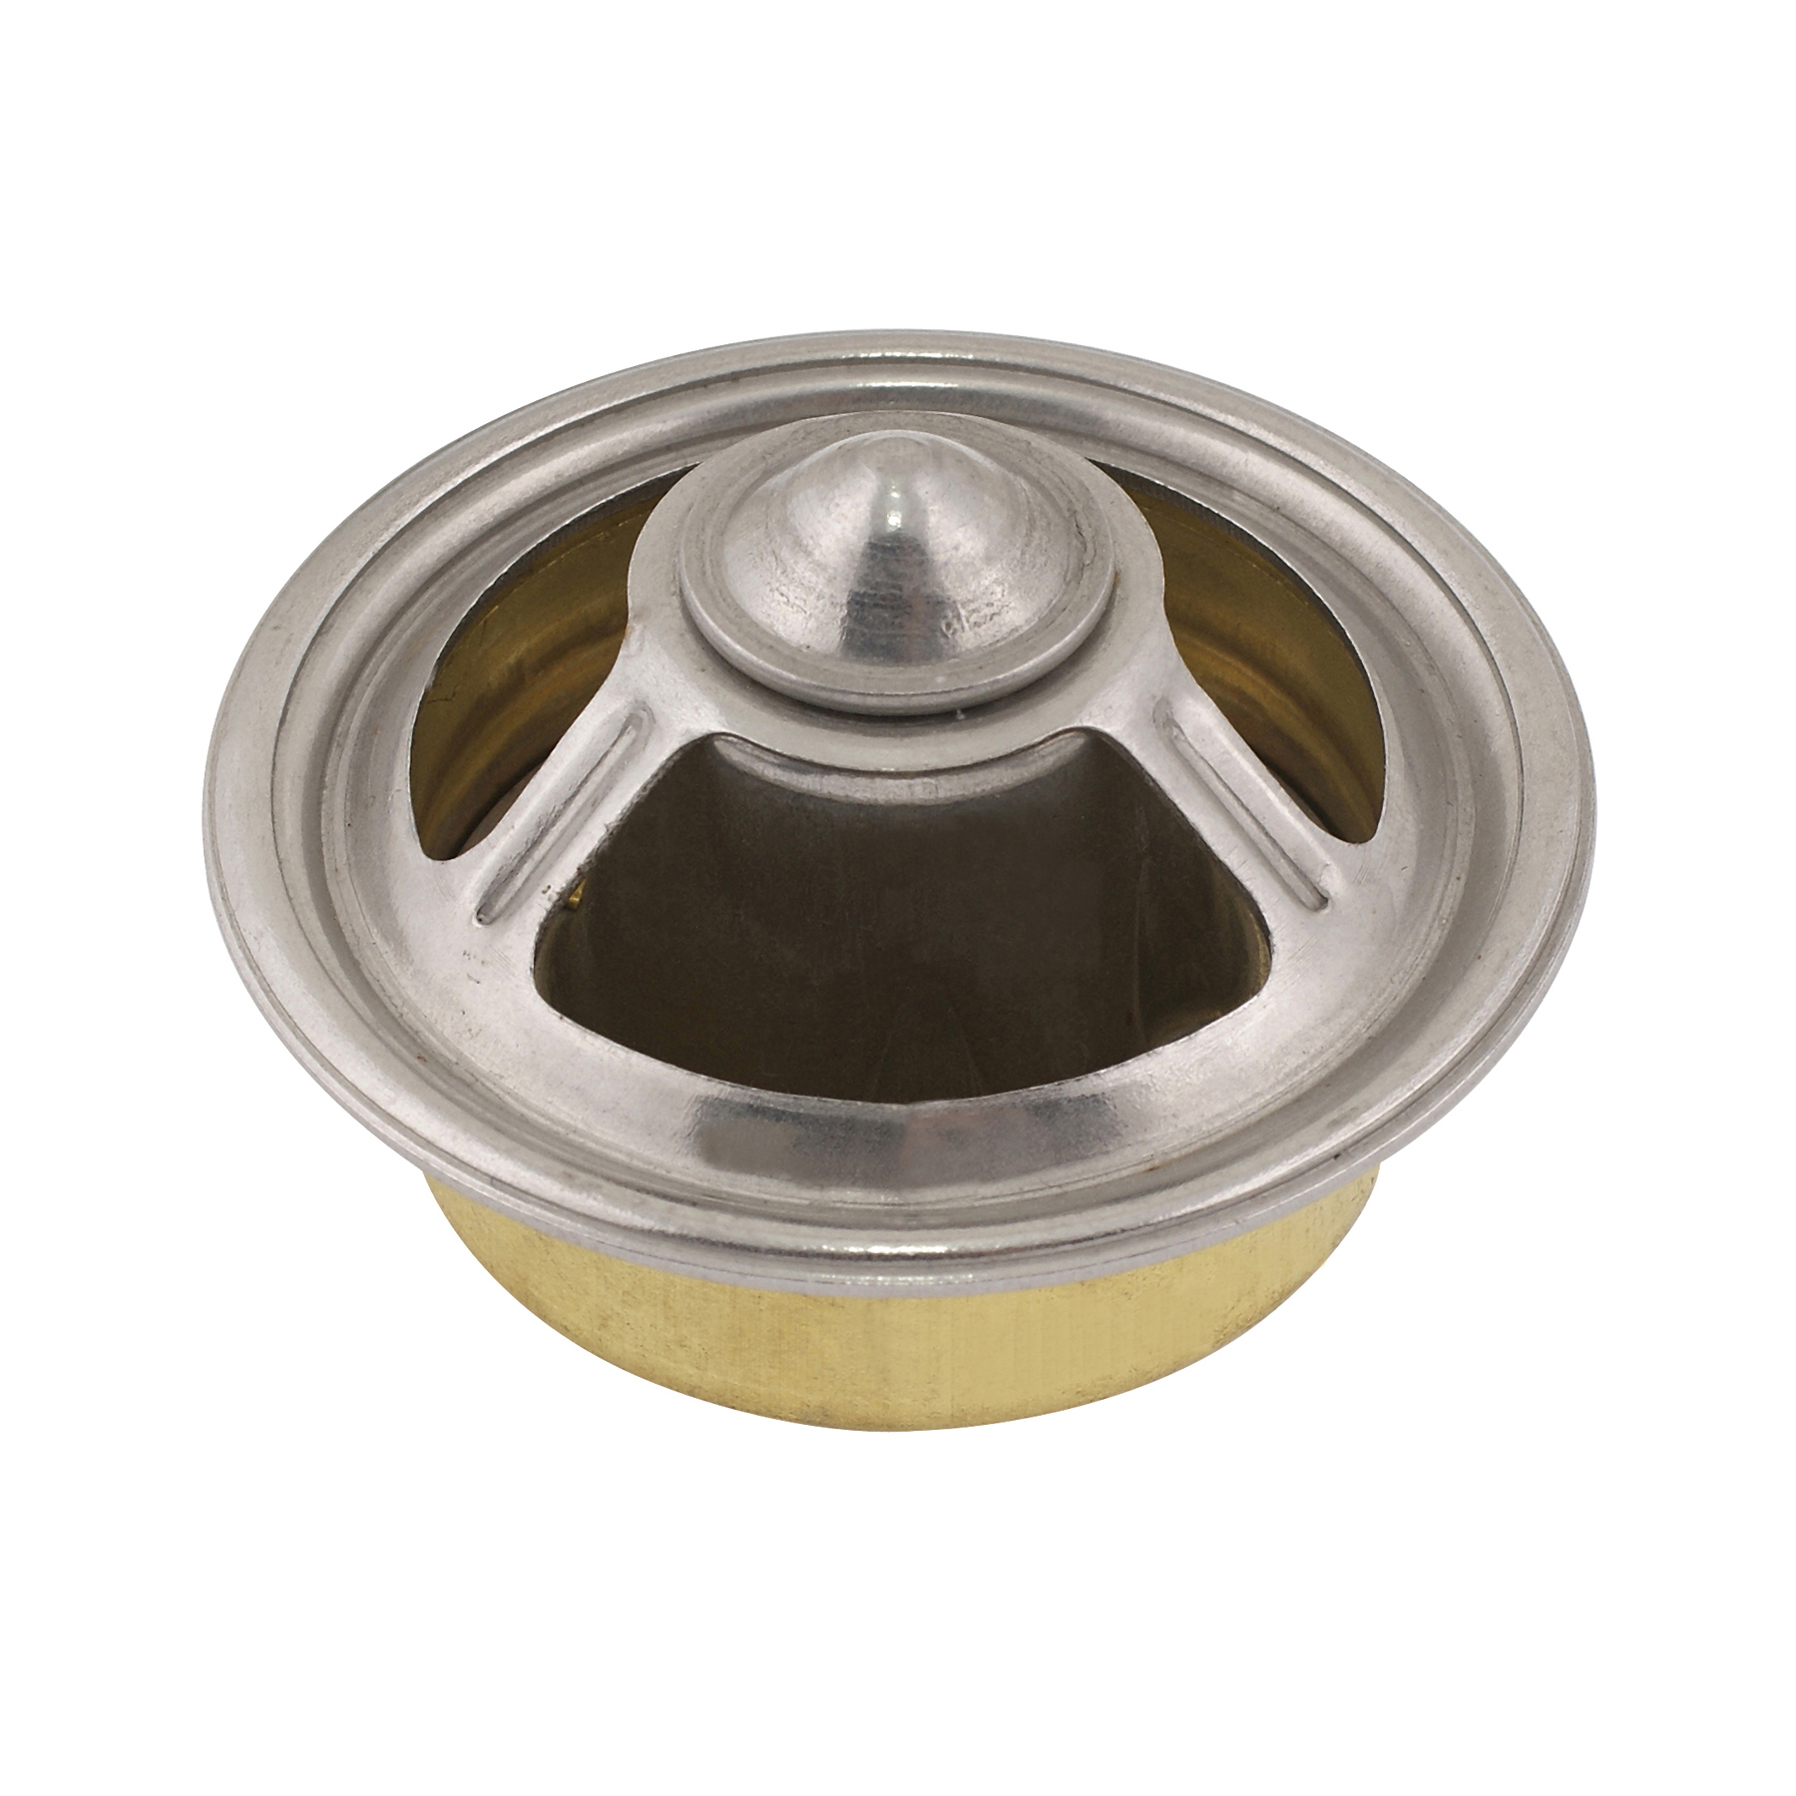 Thermostat - 180 Degree - Brass / Copper - AMC / Ford / GM - Each